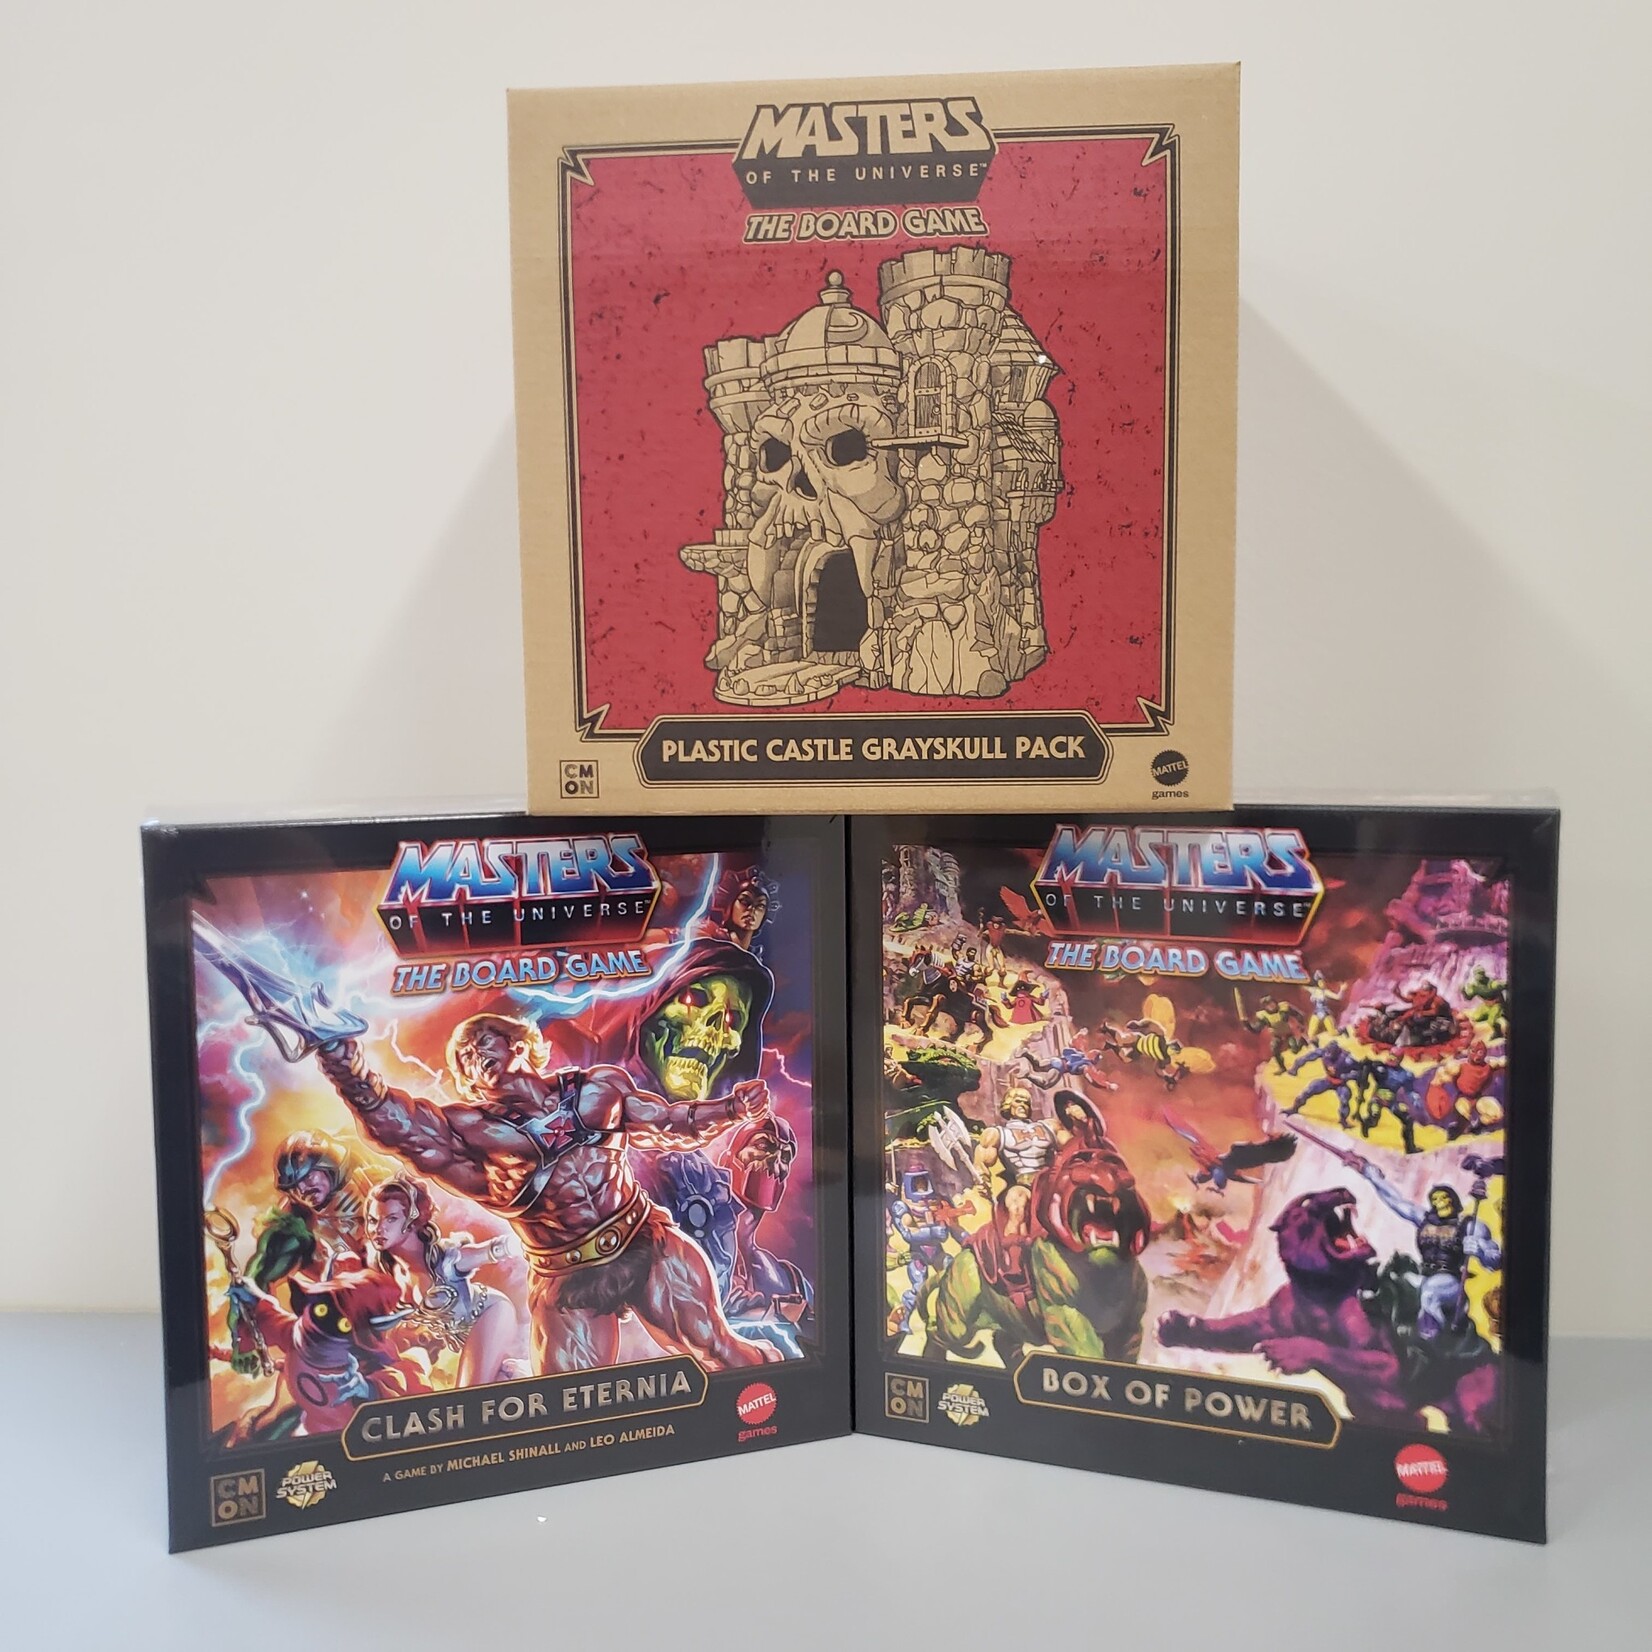 CMON Masters of the Universe - Clash  for Eternia - "I Have The Power" Kickstarter Bundle